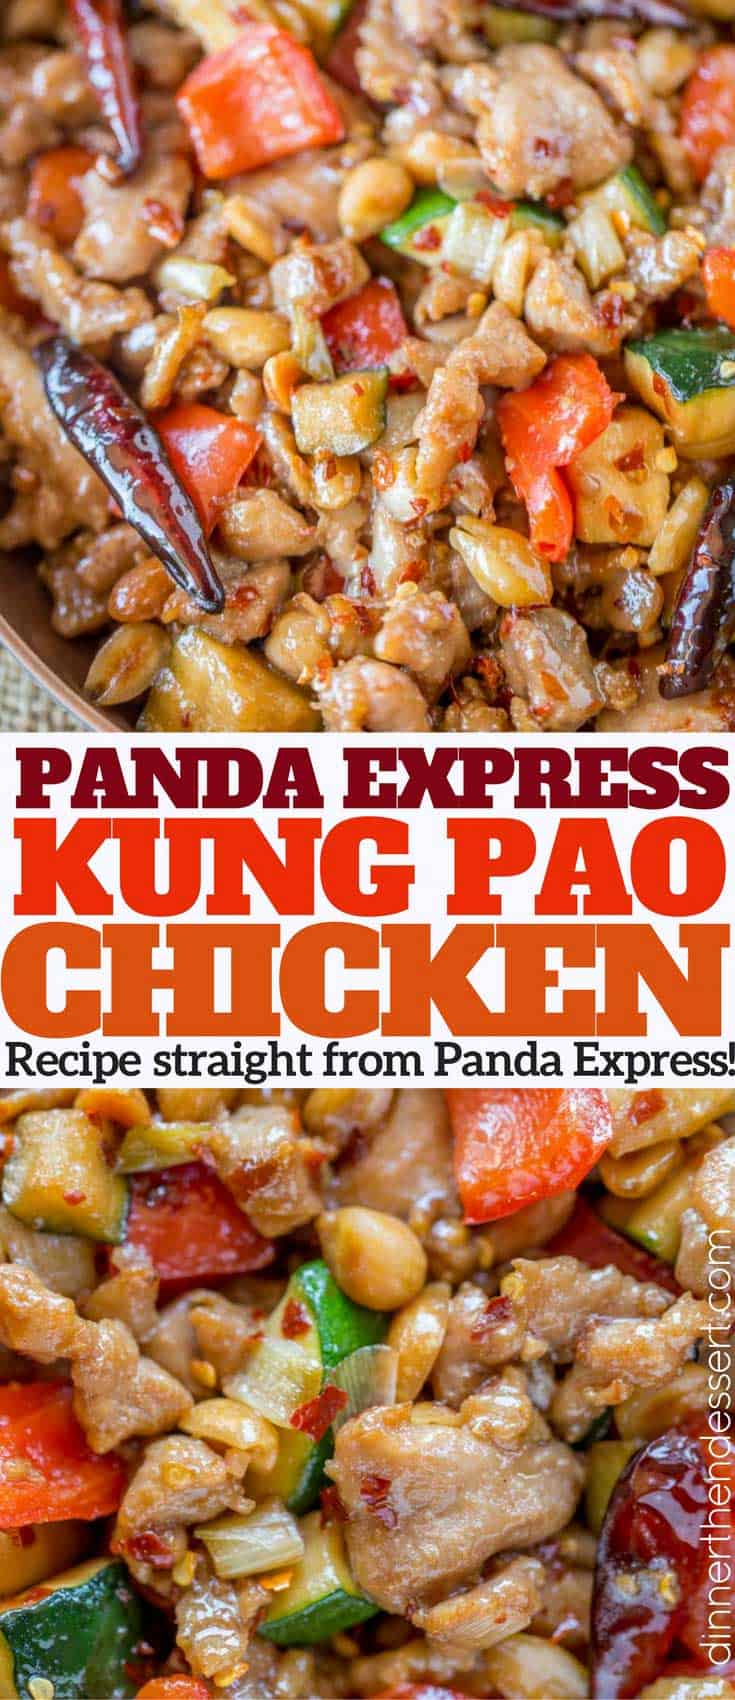 We LOVED this Panda Express Kung Pao Chicken, it was so easy to make and the best copycat!